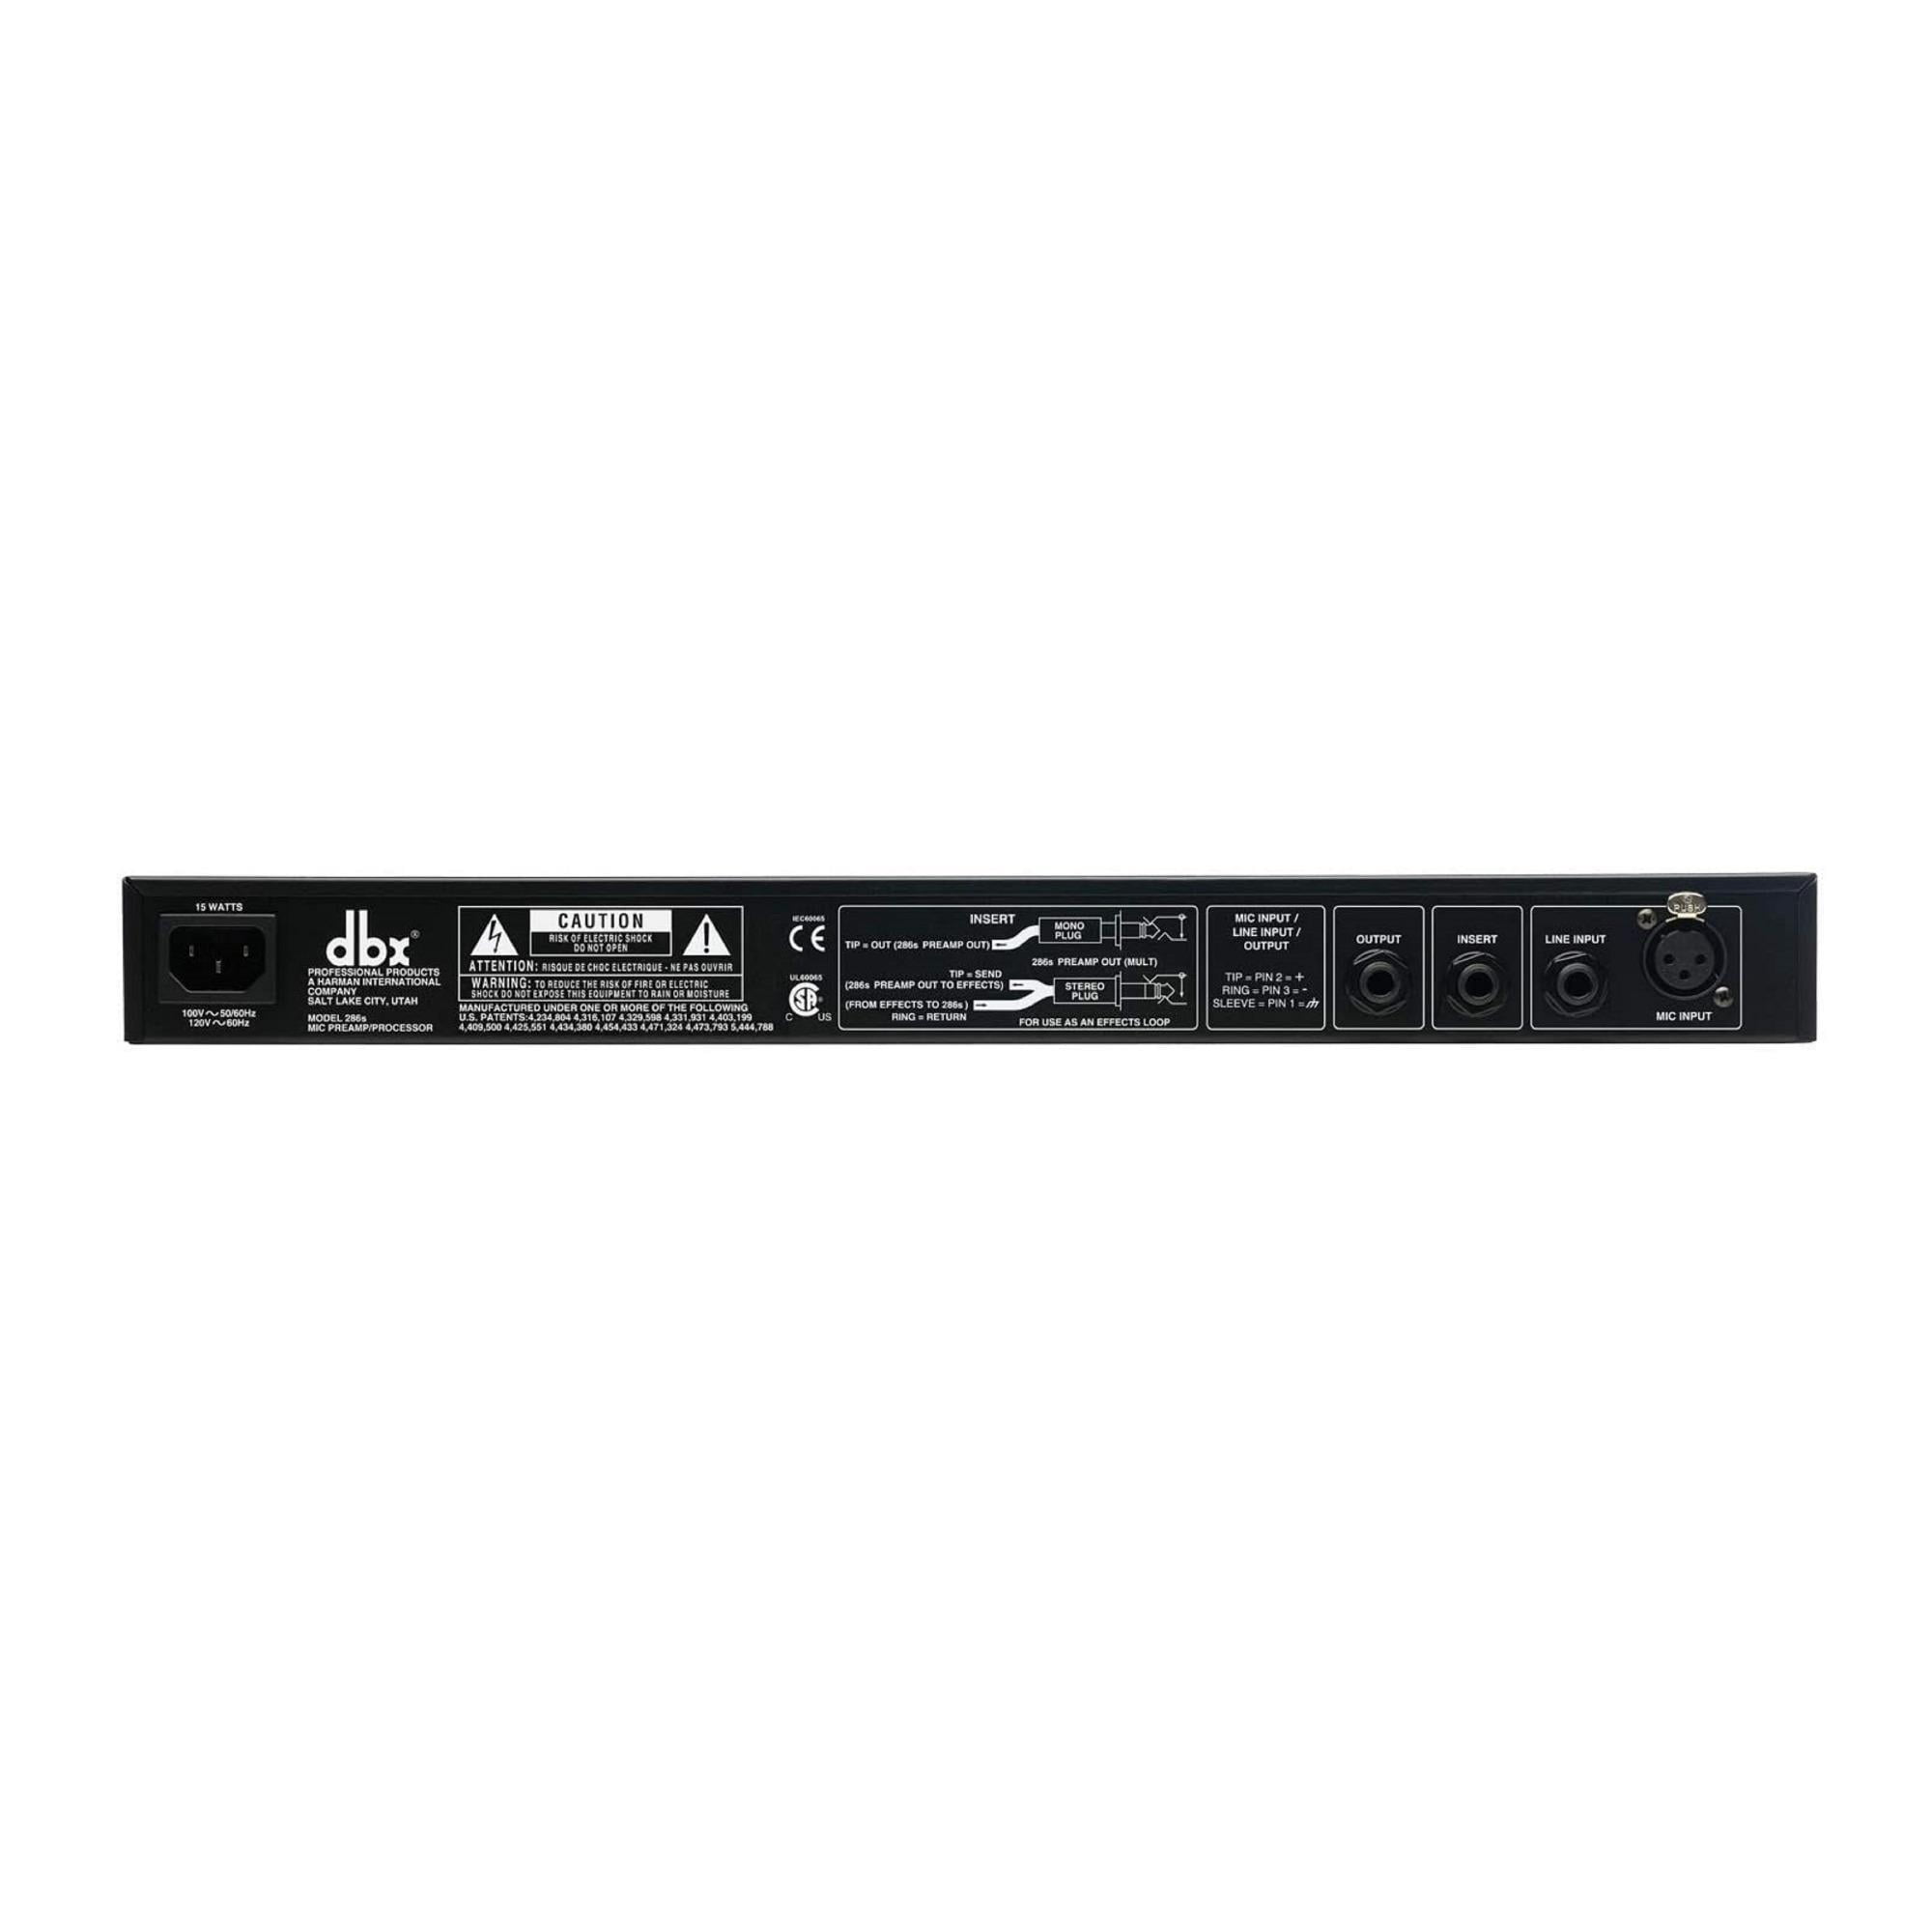 DBX 286s Microphone Preamp And Channel Strip Processor with 